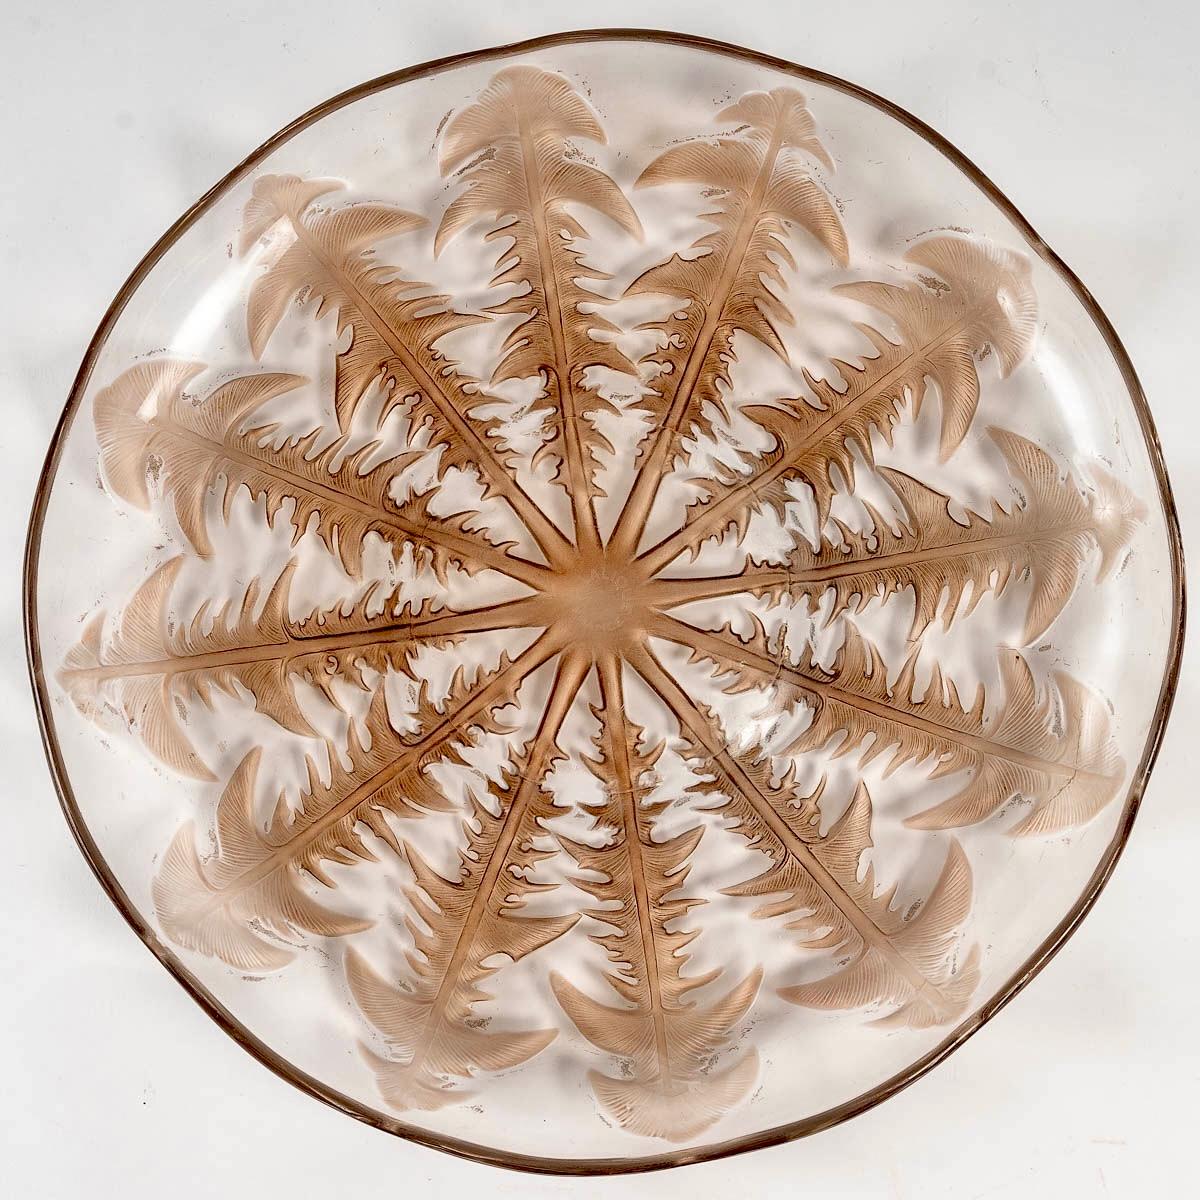 Molded 1921 René Lalique, Pair of Plates Dishes Pissenlit Glass with Sepia Patina